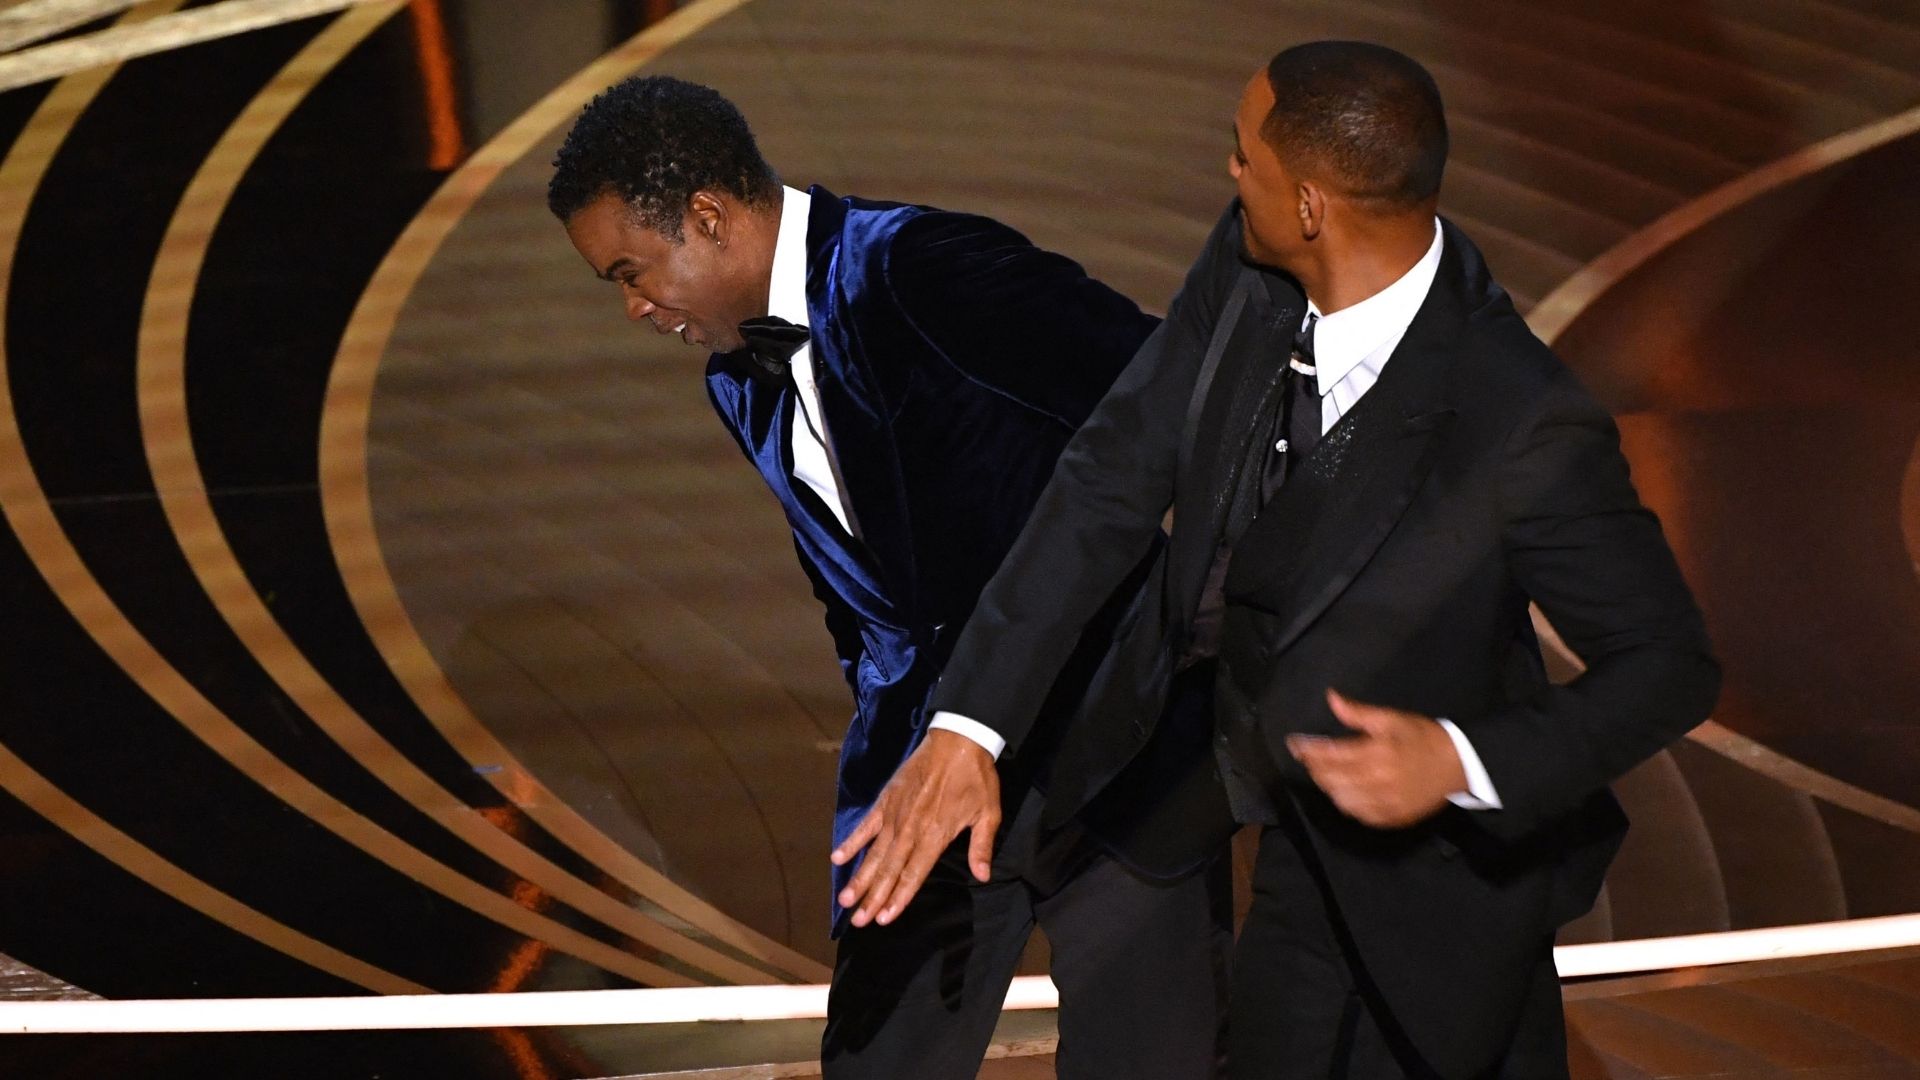 Will Smith’s mother on slap at the Oscars: “It’s the first time I’ve seen him explode like that”